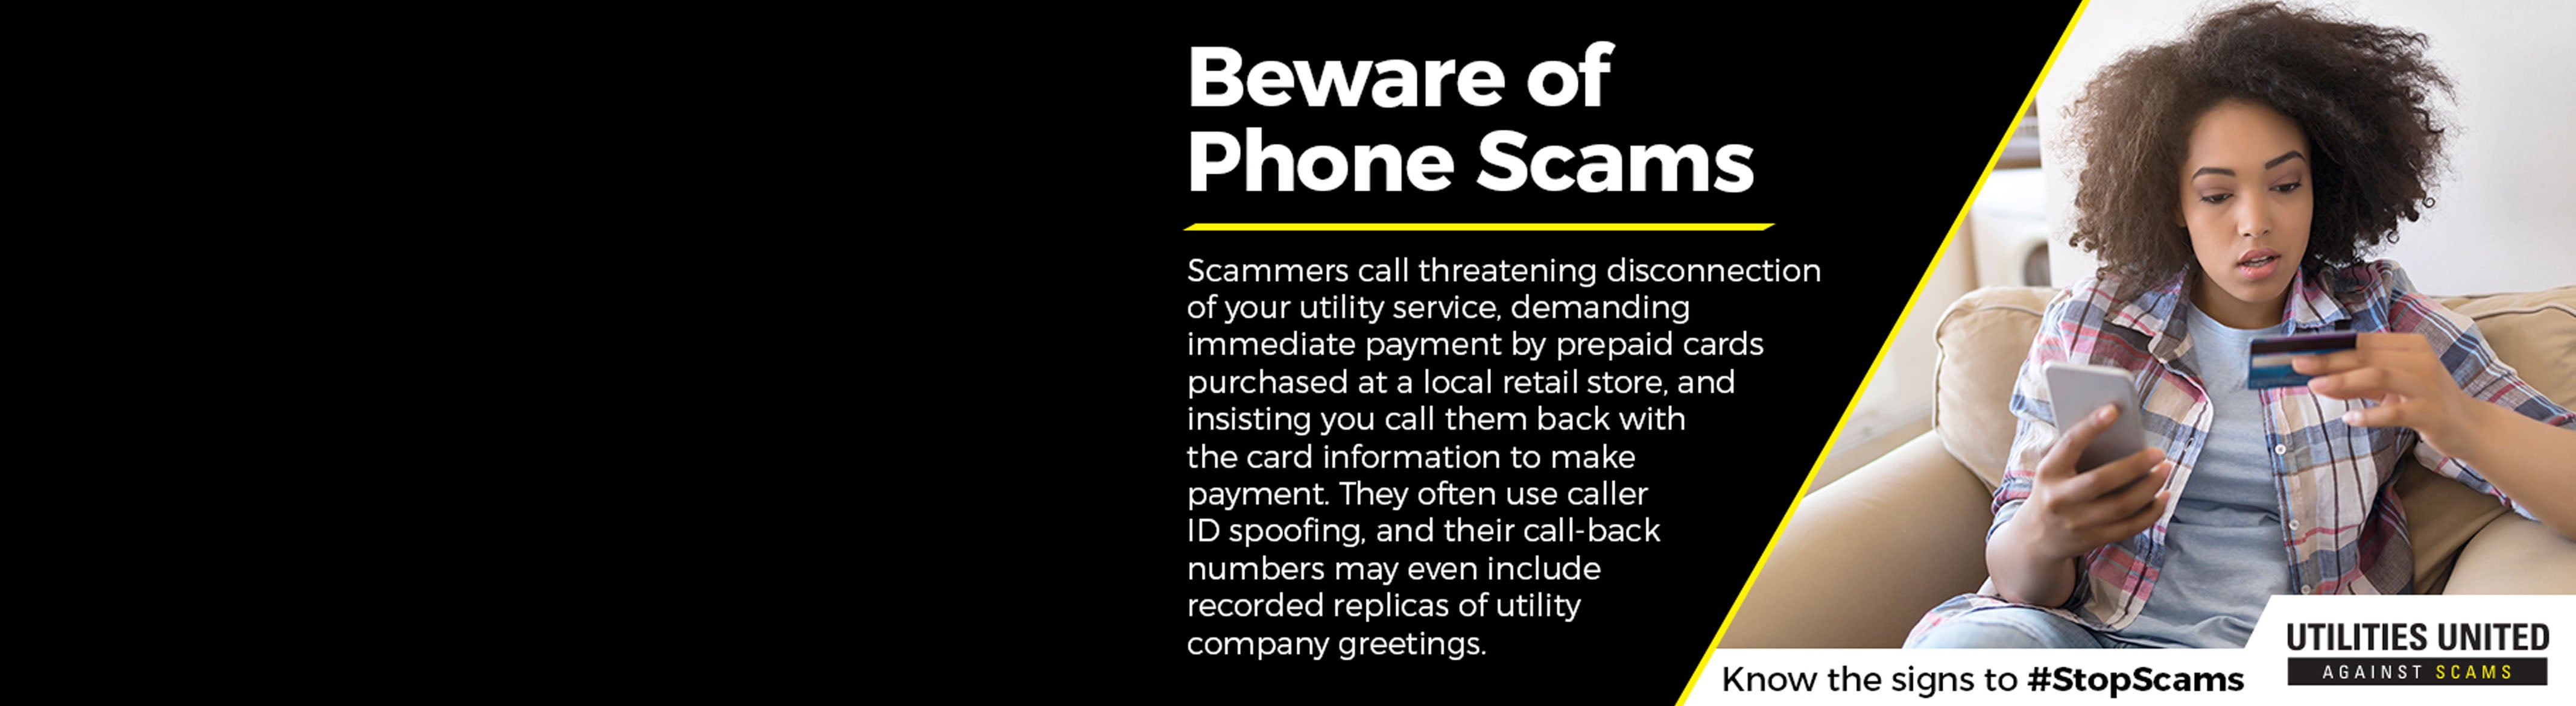 Beware of Phone Scams. Call Fayette Electric if you suspect foul play.